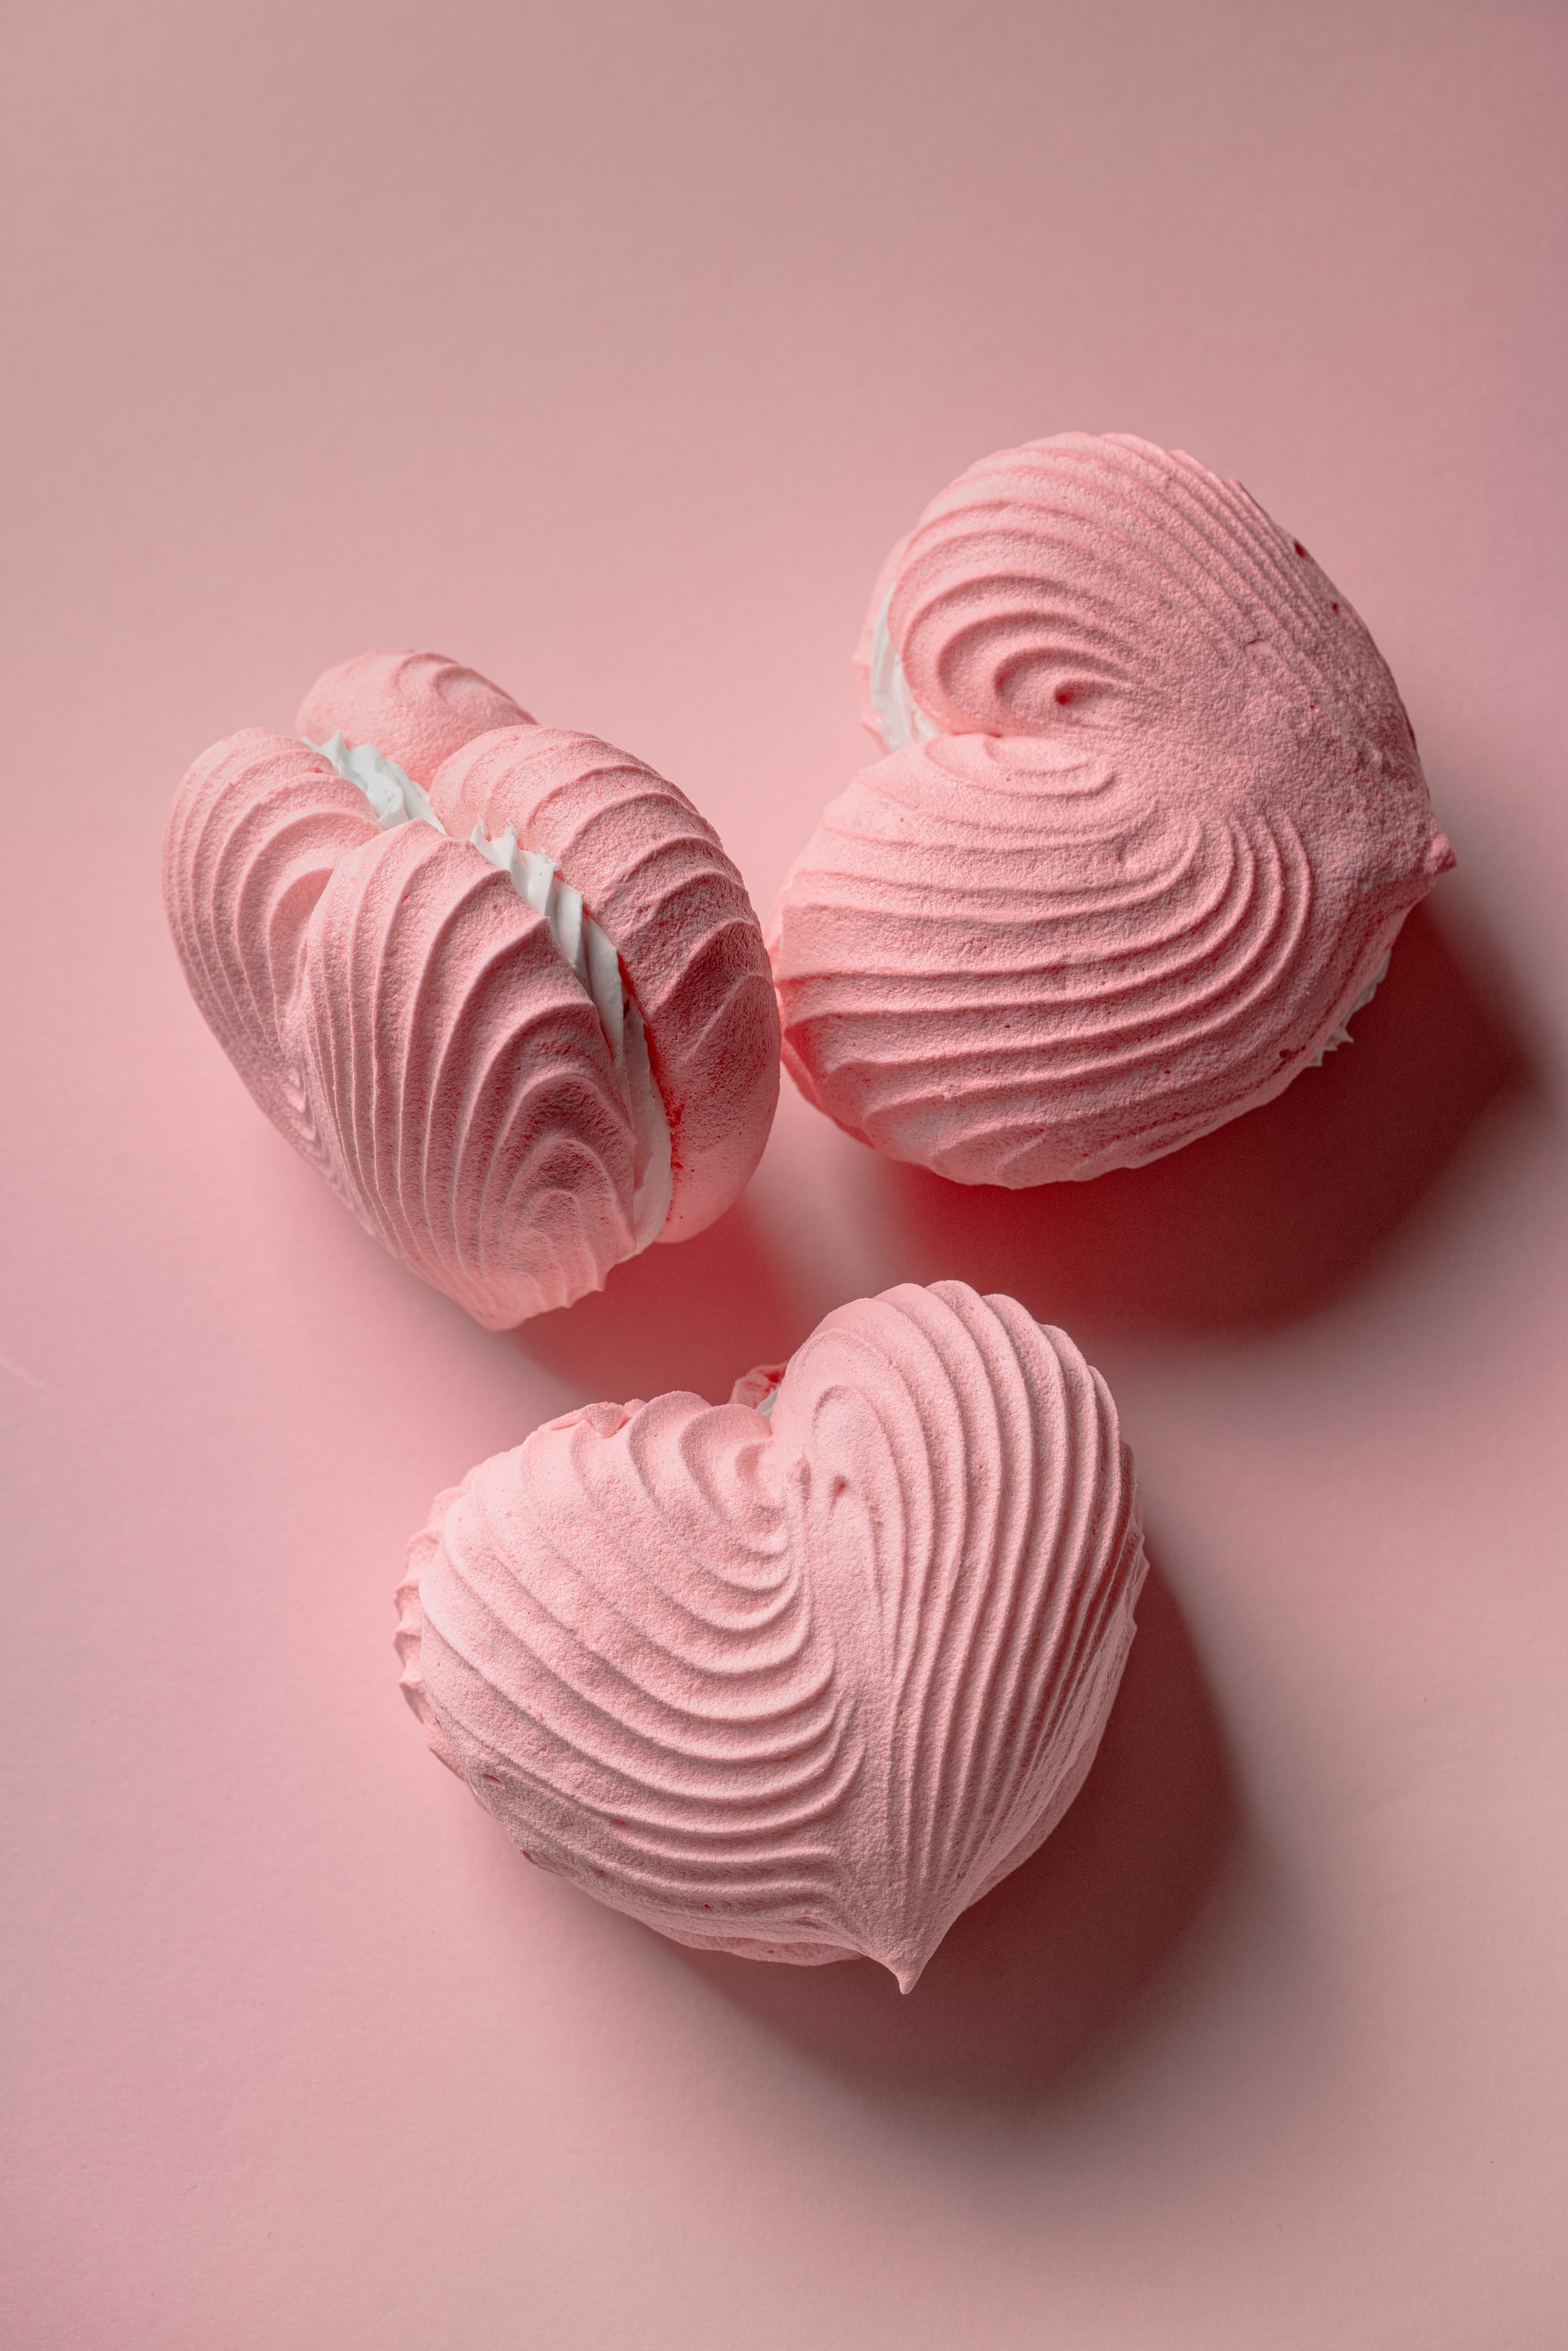 Pink Heart Pastries Valentine's Day iPhone Wallpaper. The Dreamiest iPhone Wallpaper For Valentine's Day That Fit Any Aesthetic